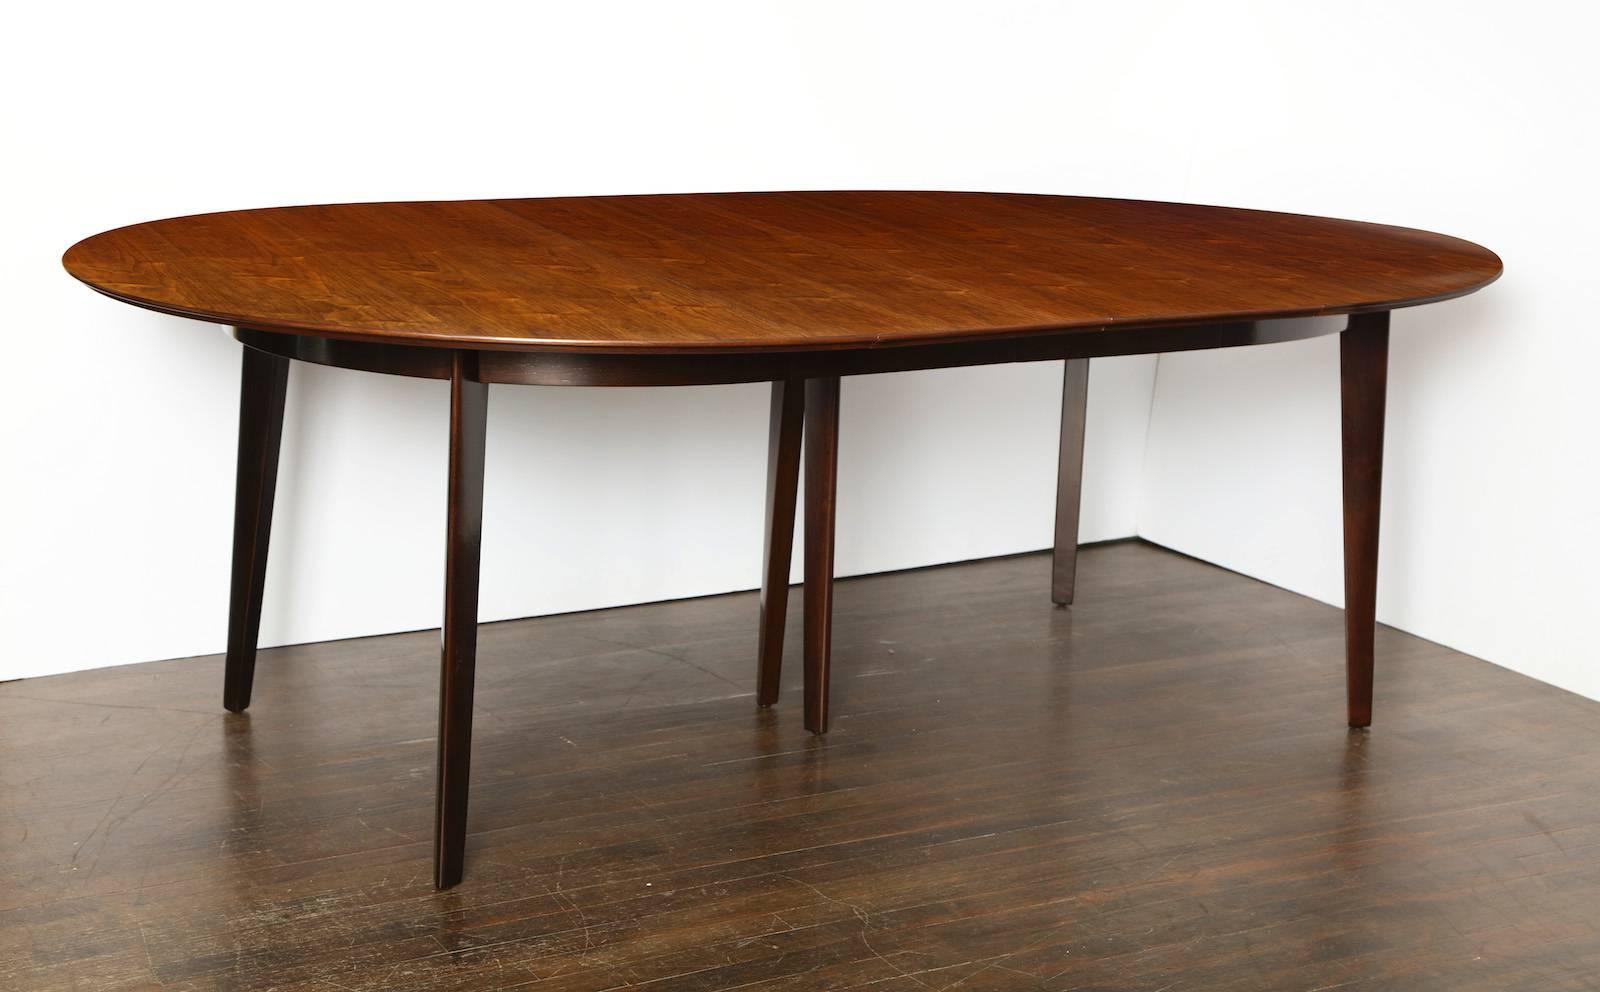 Edward Wormley Expandable Dining Table #696, for Dunbar.  Slightly oval top of figured walnut, with dark stained mahogany legs and two leaves. Retractable center leg for support when the table is extended. Recently refinished and in excellent